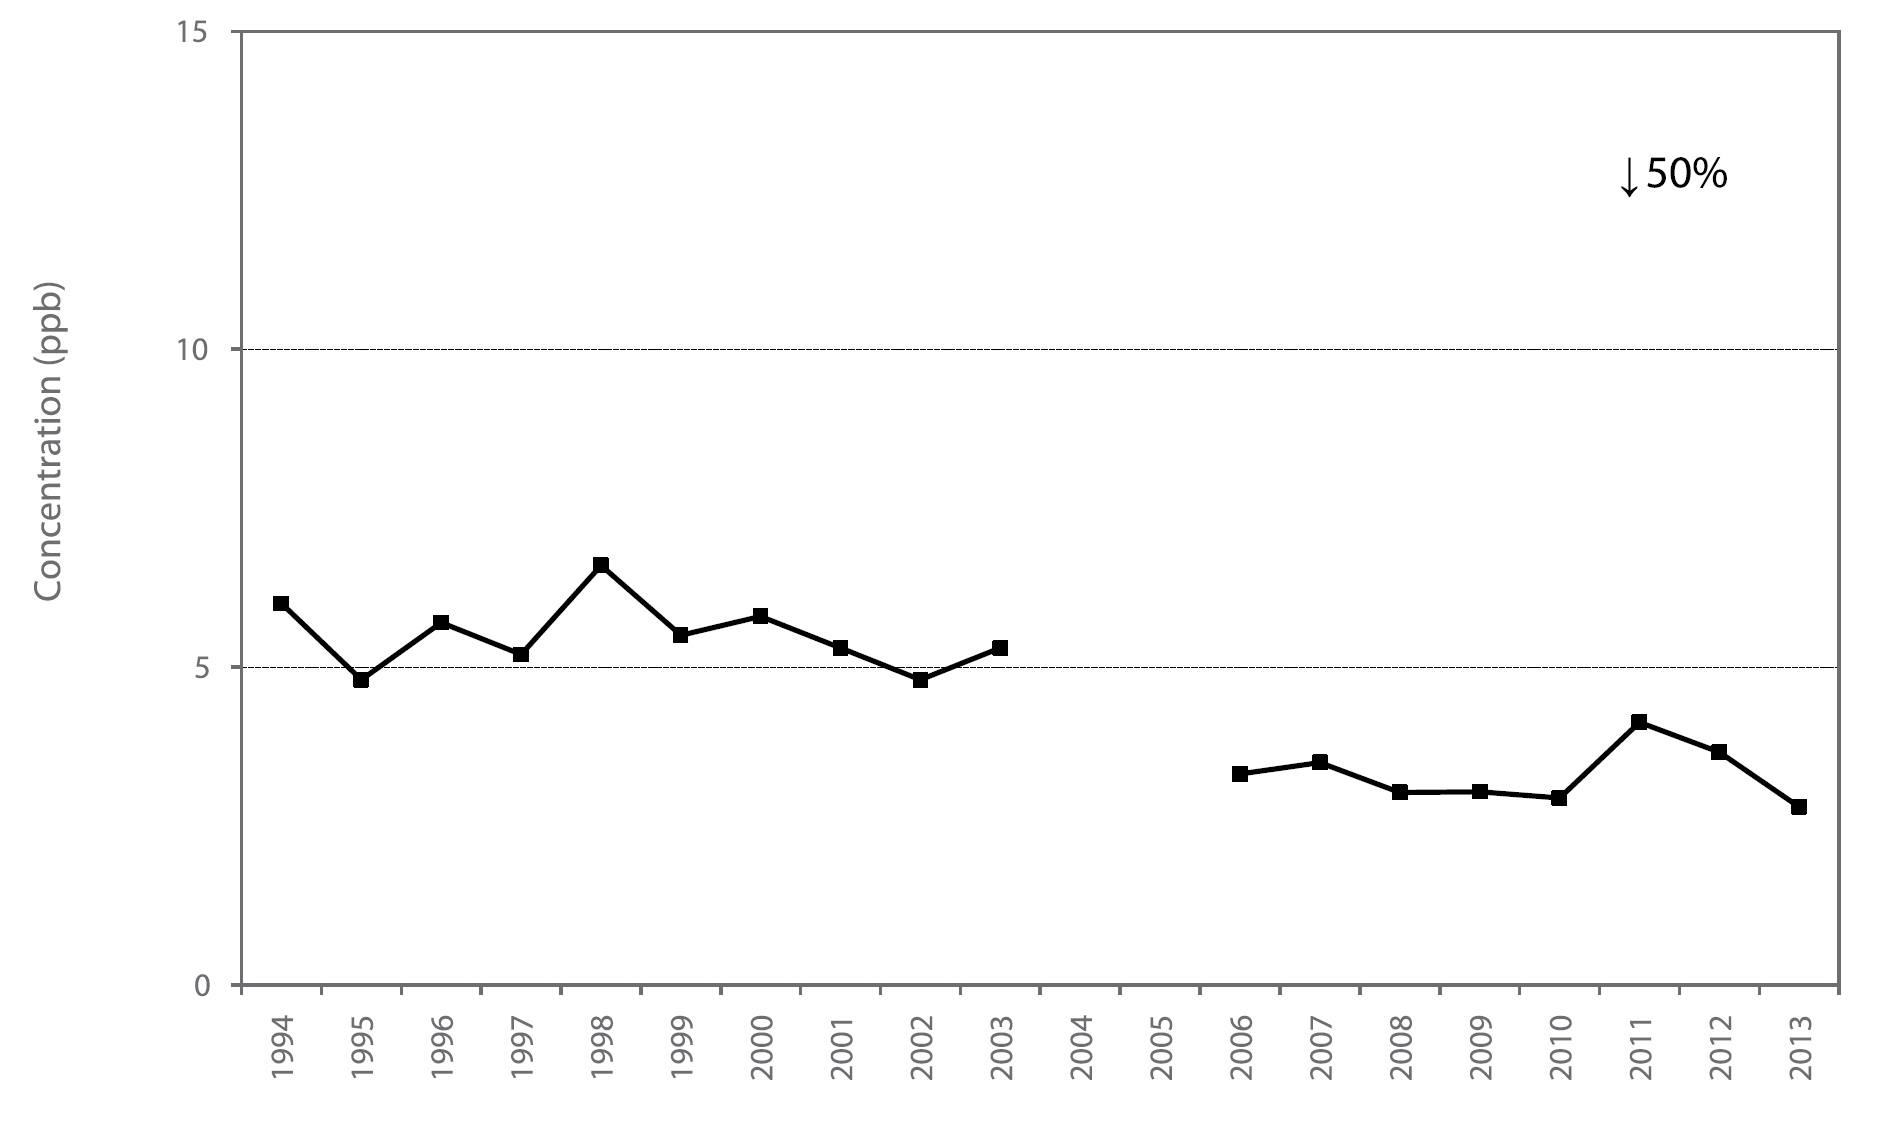 Figure A45 is a line chart displaying the sulphur dioxide annual mean at Hamilton Mountain from 1994 to 2013. Over this 20-year period, sulphur dioxide decreased 50%.